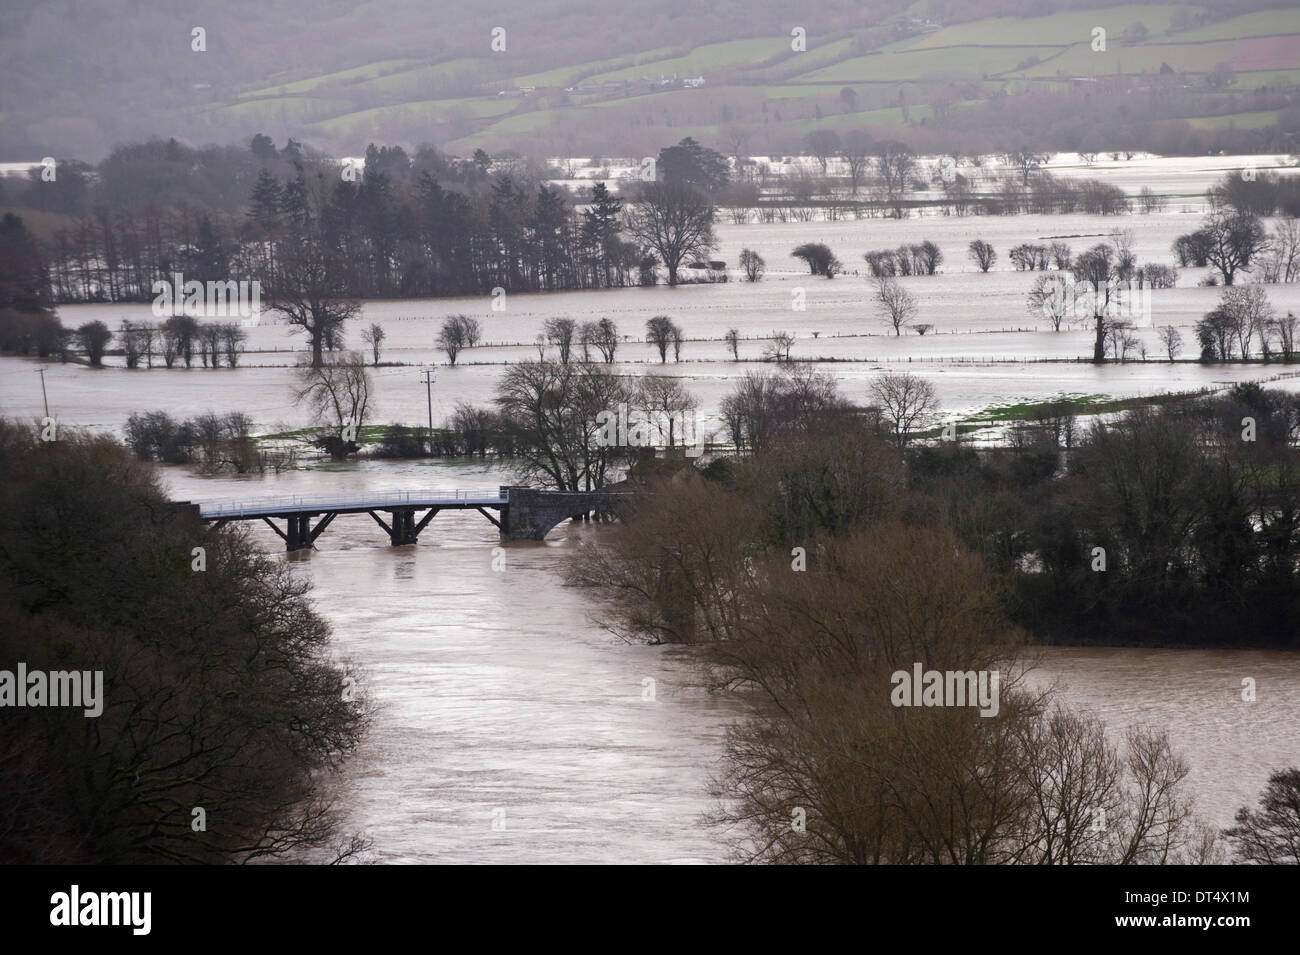 Whitney-on-Wye, Herefordshire, England, UK. 9th Feb, 2014. River Wye bursts it's banks and floods farmland around the Grade II listed toll bridge originally built in 1779. Torrential rain desposited by winter storm has caused widespread flooding across the South and West of the UK. Credit:  Jeff Morgan/Alamy Live News Stock Photo